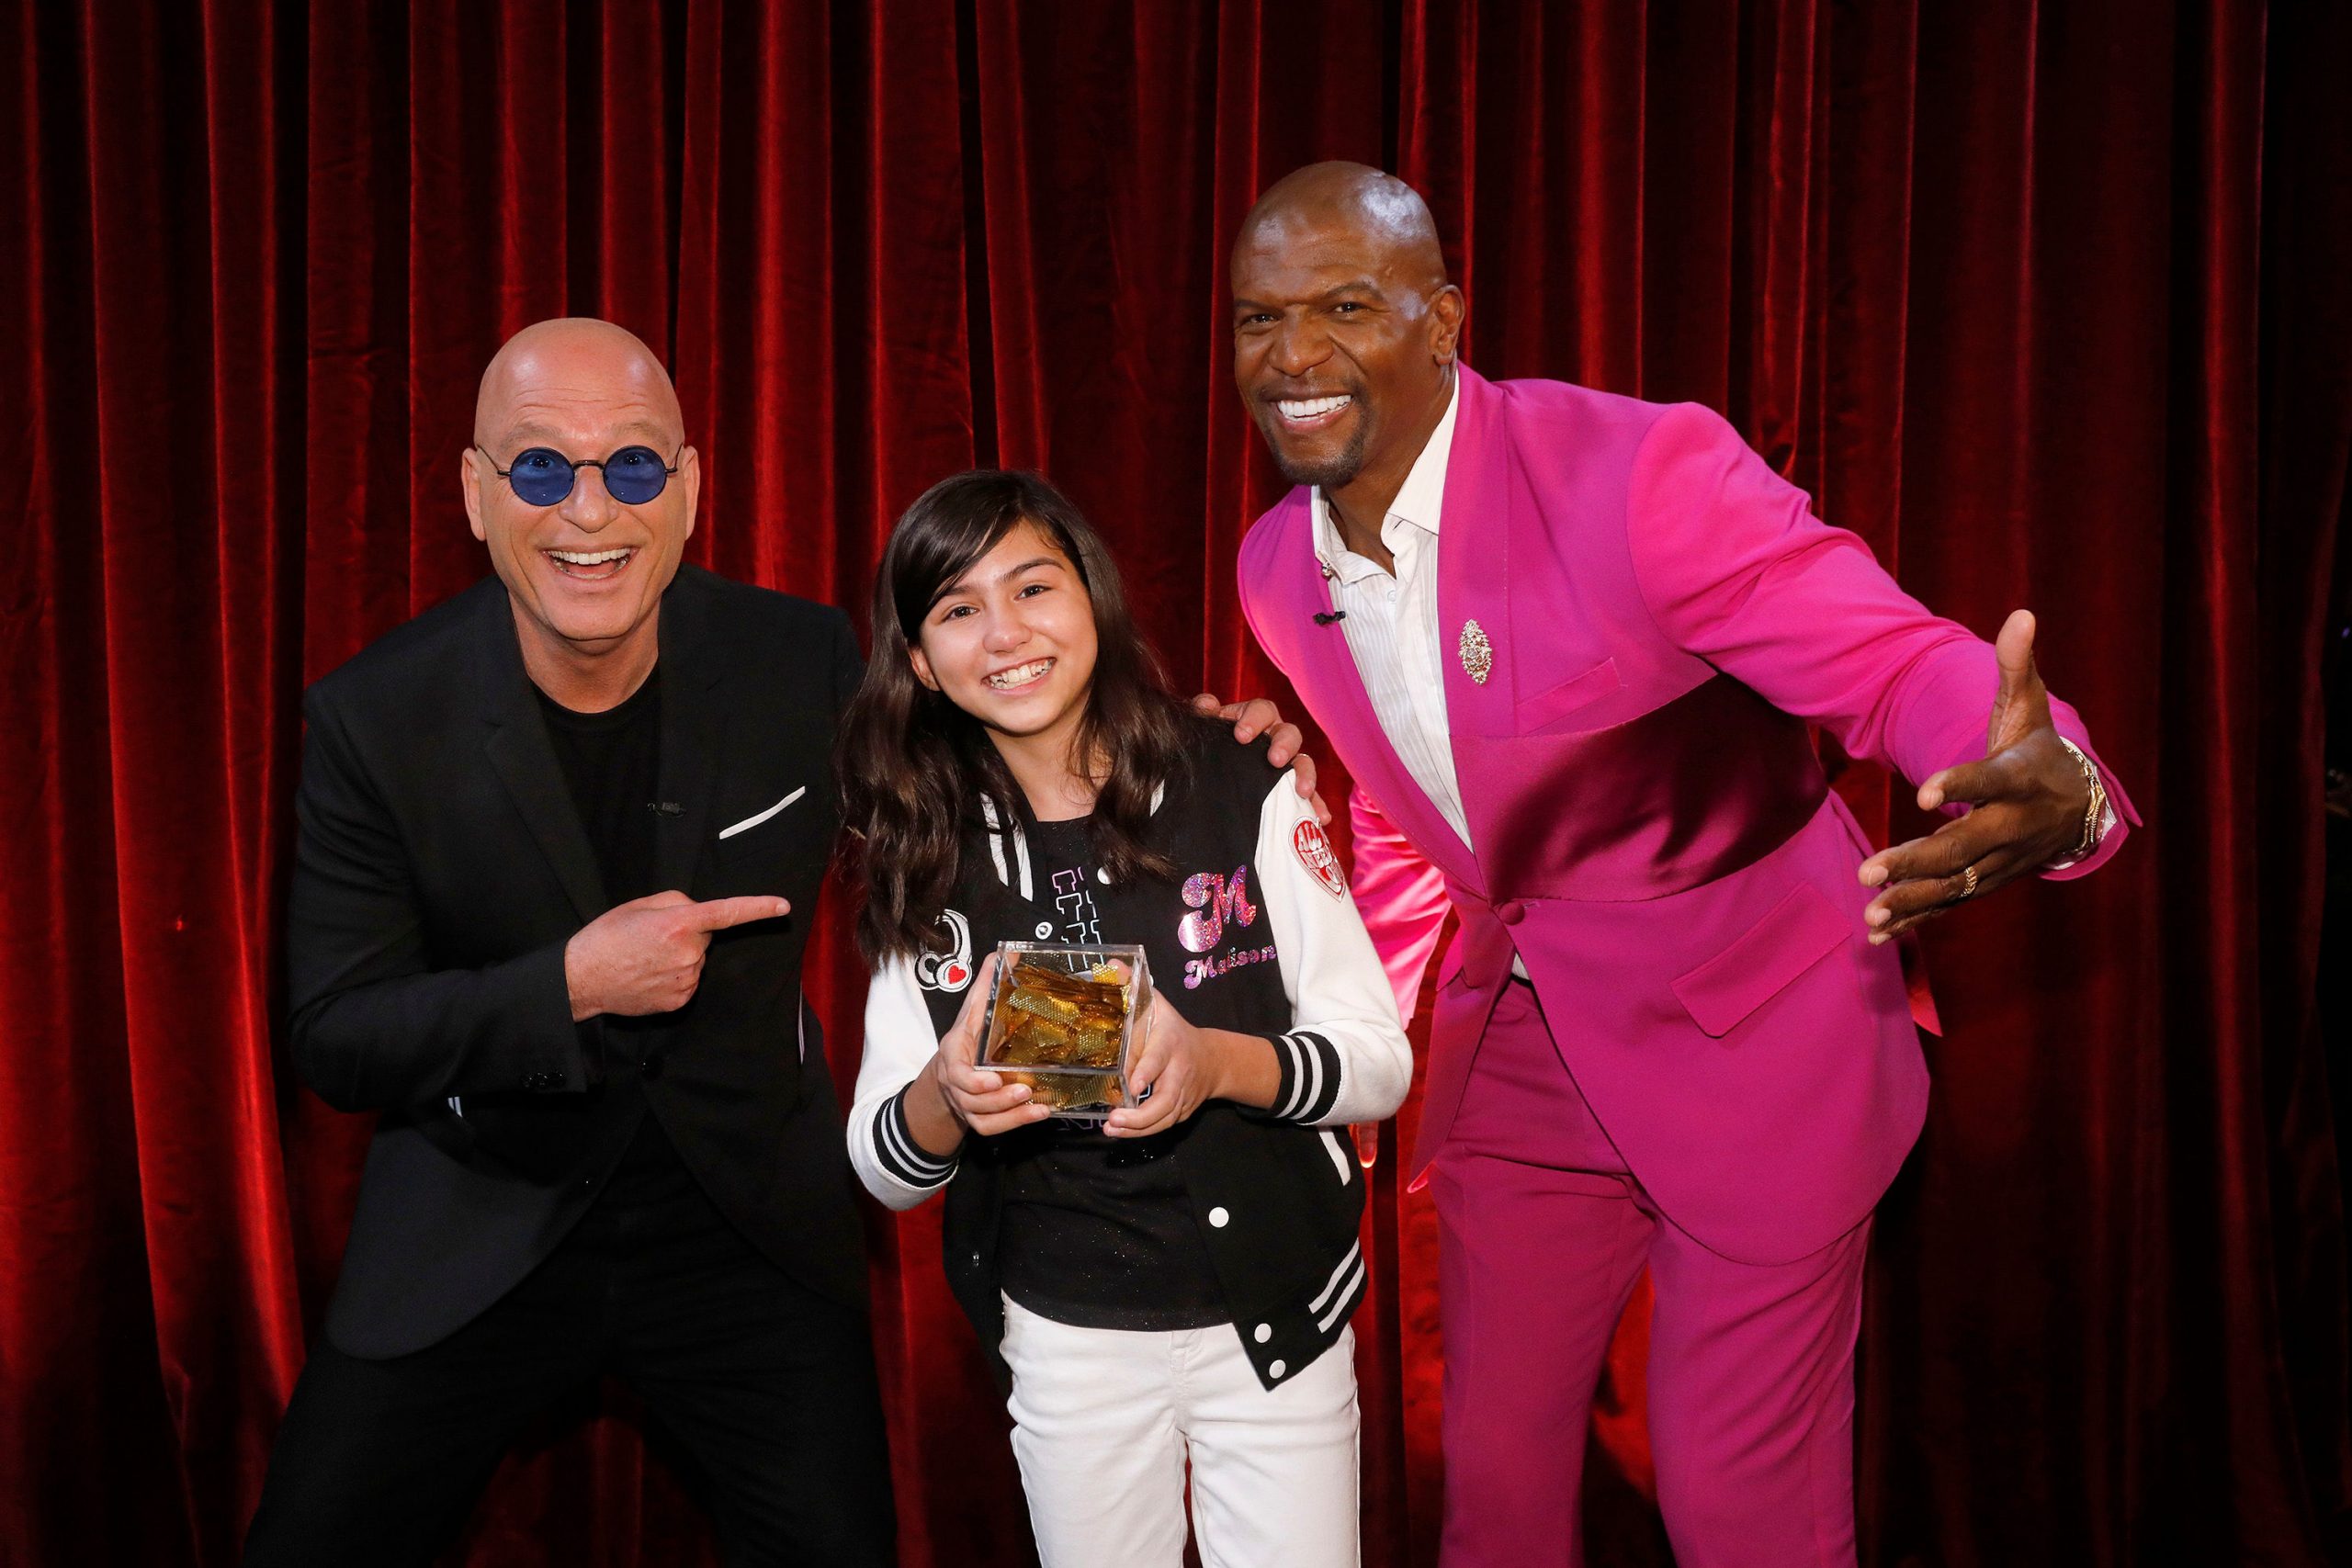 America’s Got Talent 17, episode 3: Why was Howie Mandel missing